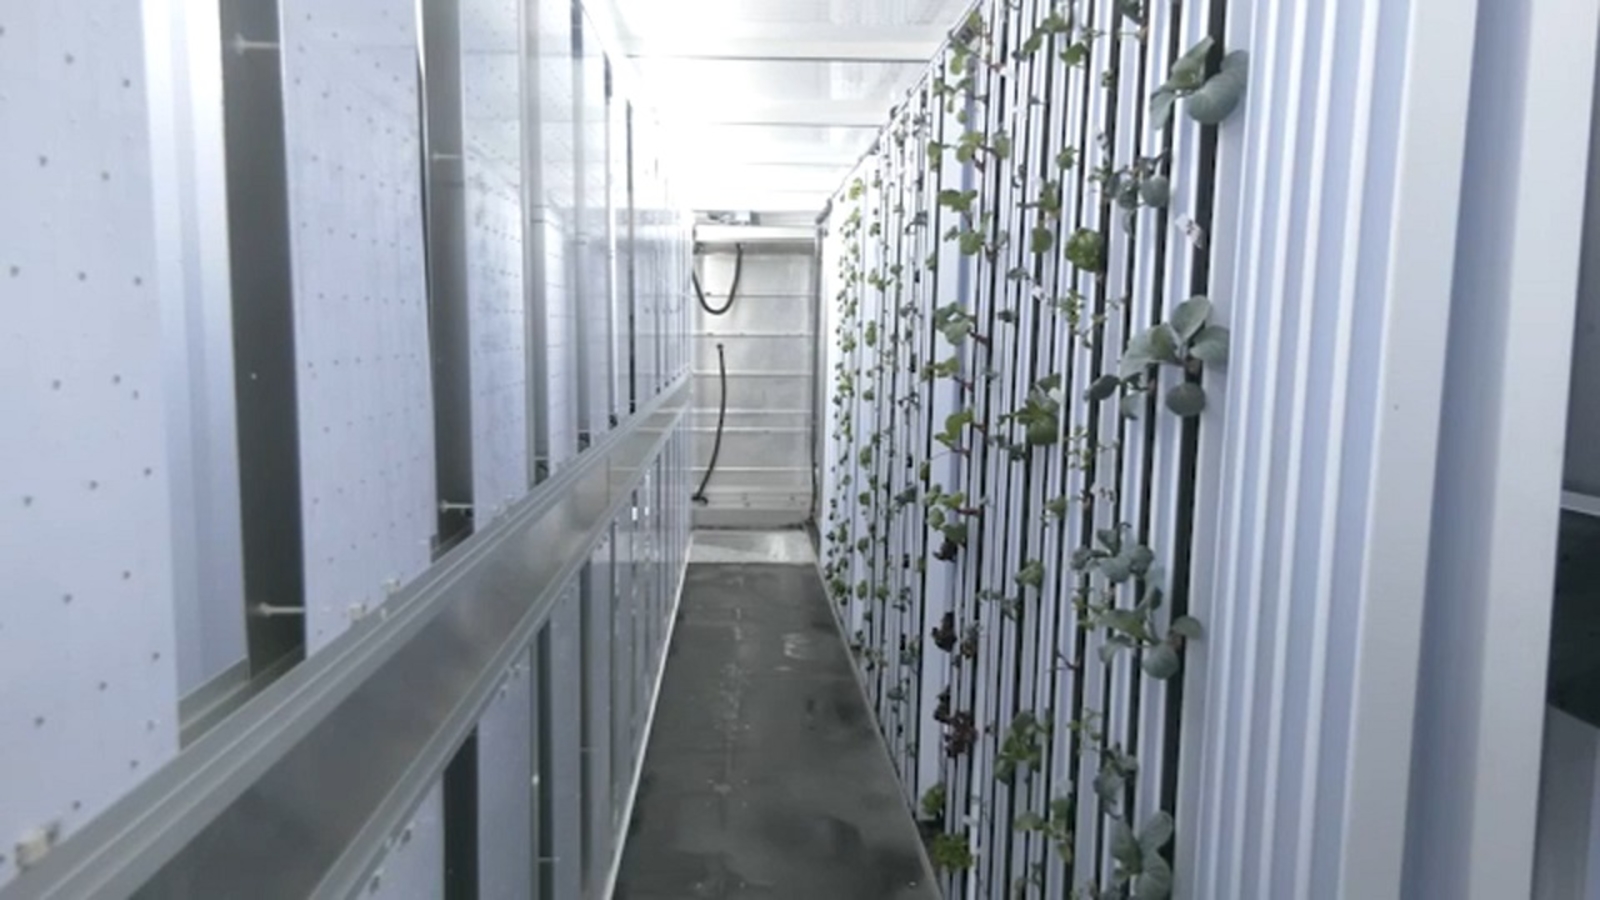  Mokena man grows urban farm in a shipping container in his driveway 